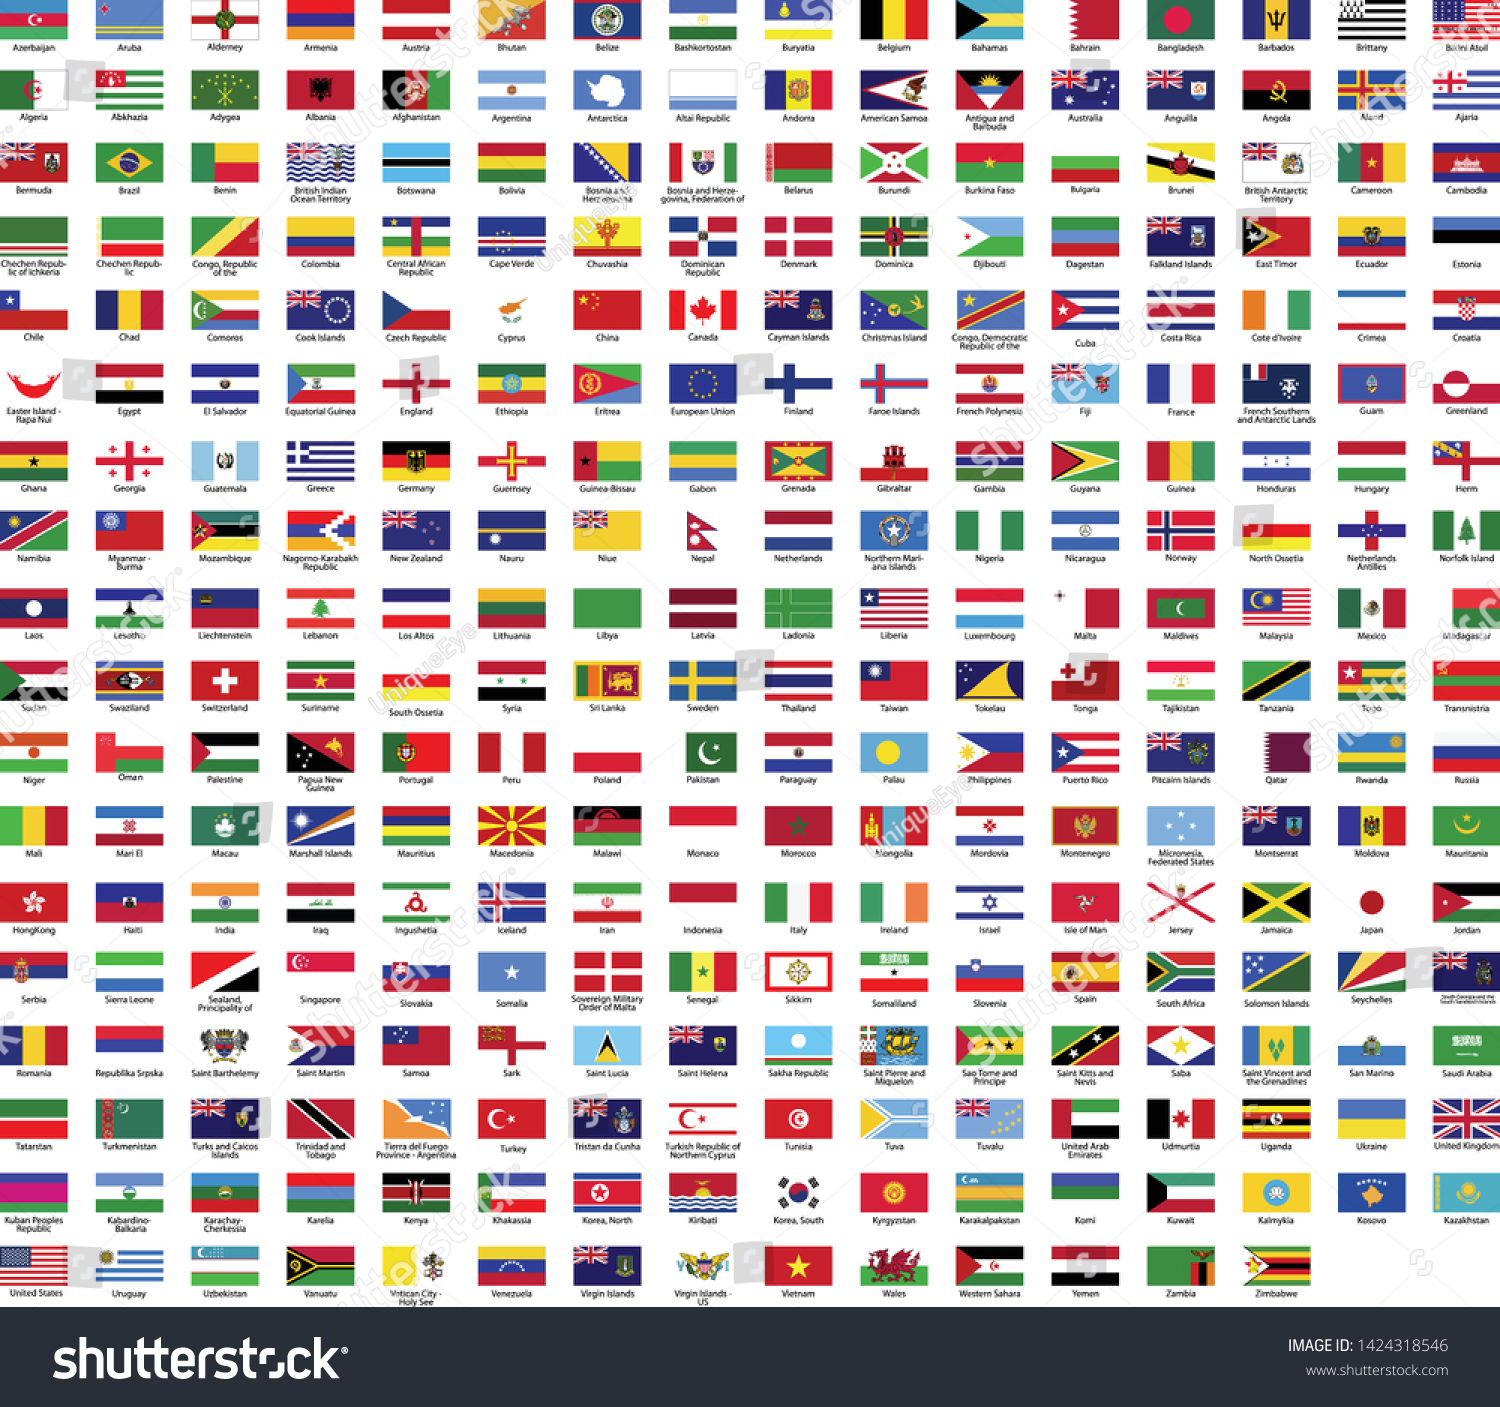 Flags World Collection Sorted By Continents Stock Vector (Royalty Free ...